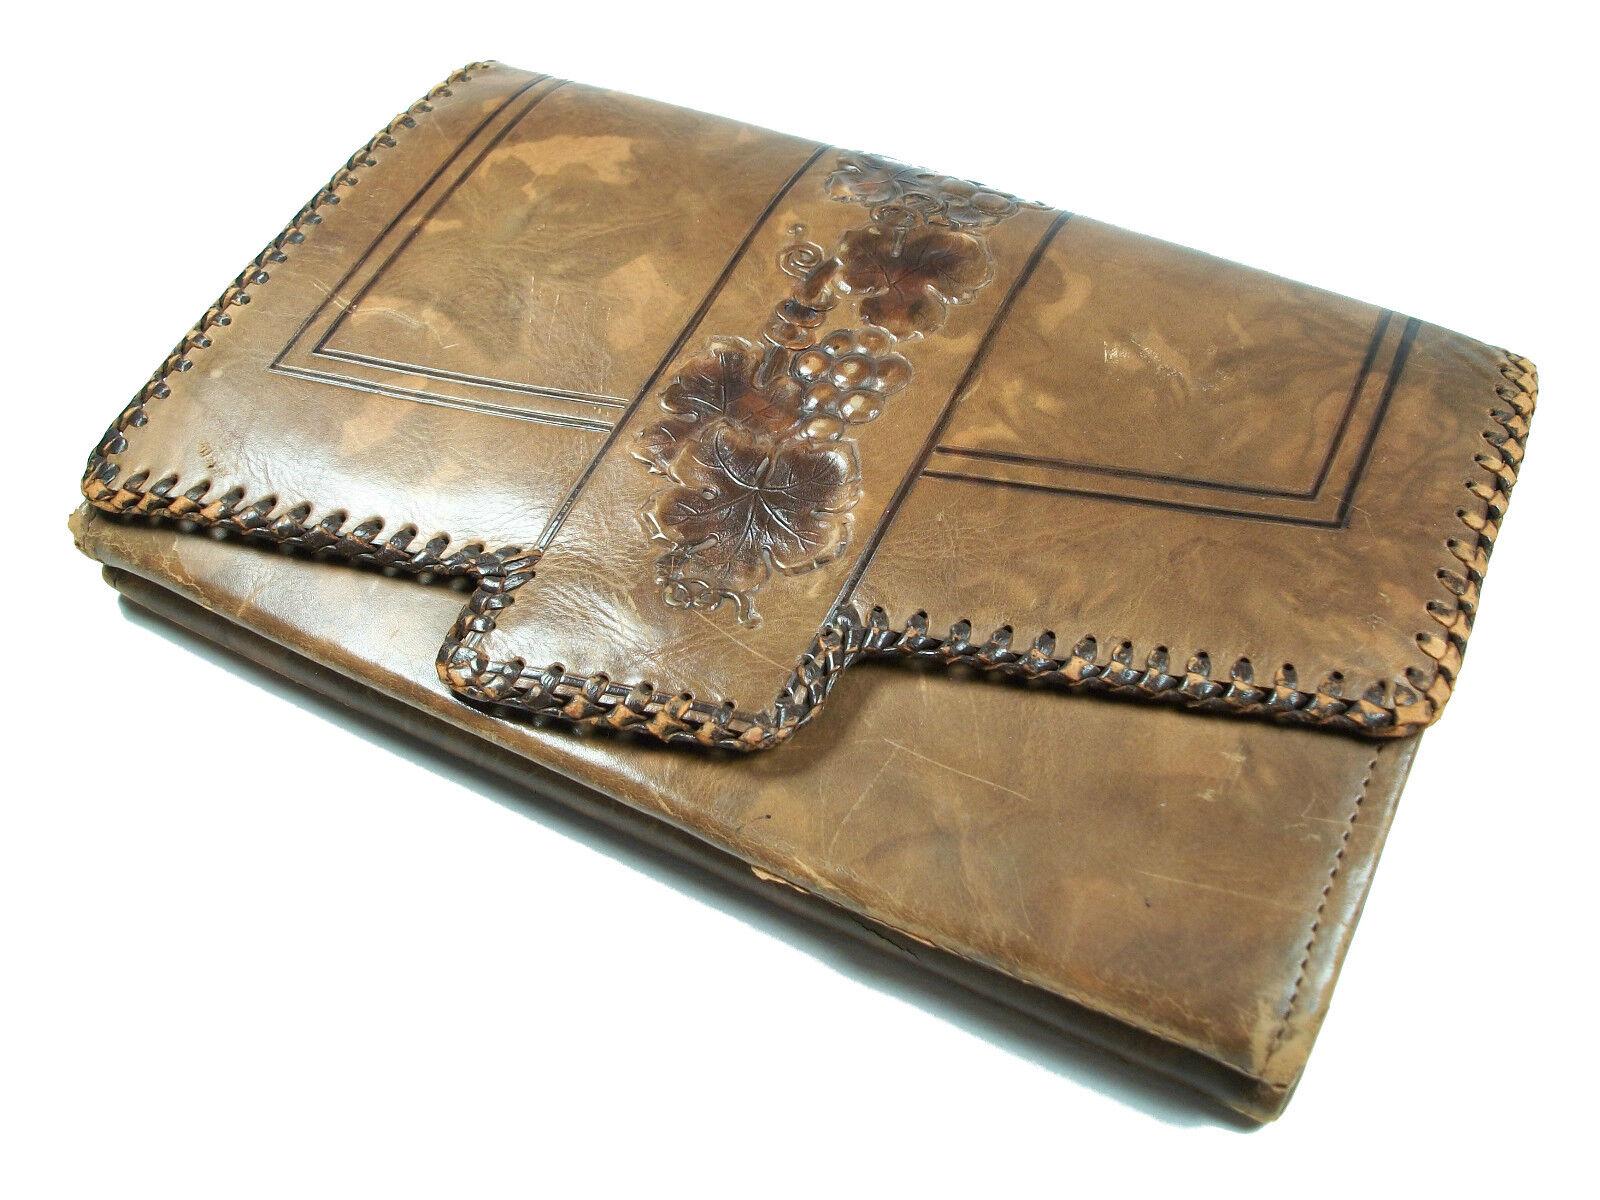 ARDEN FOREST - Vintage embossed leather clutch - handle to the back - whip-stitched flap with press-stud closure - embossed on the front flap with a grape vine pattern - full width open pocket to the back - kid leather interior lining - central